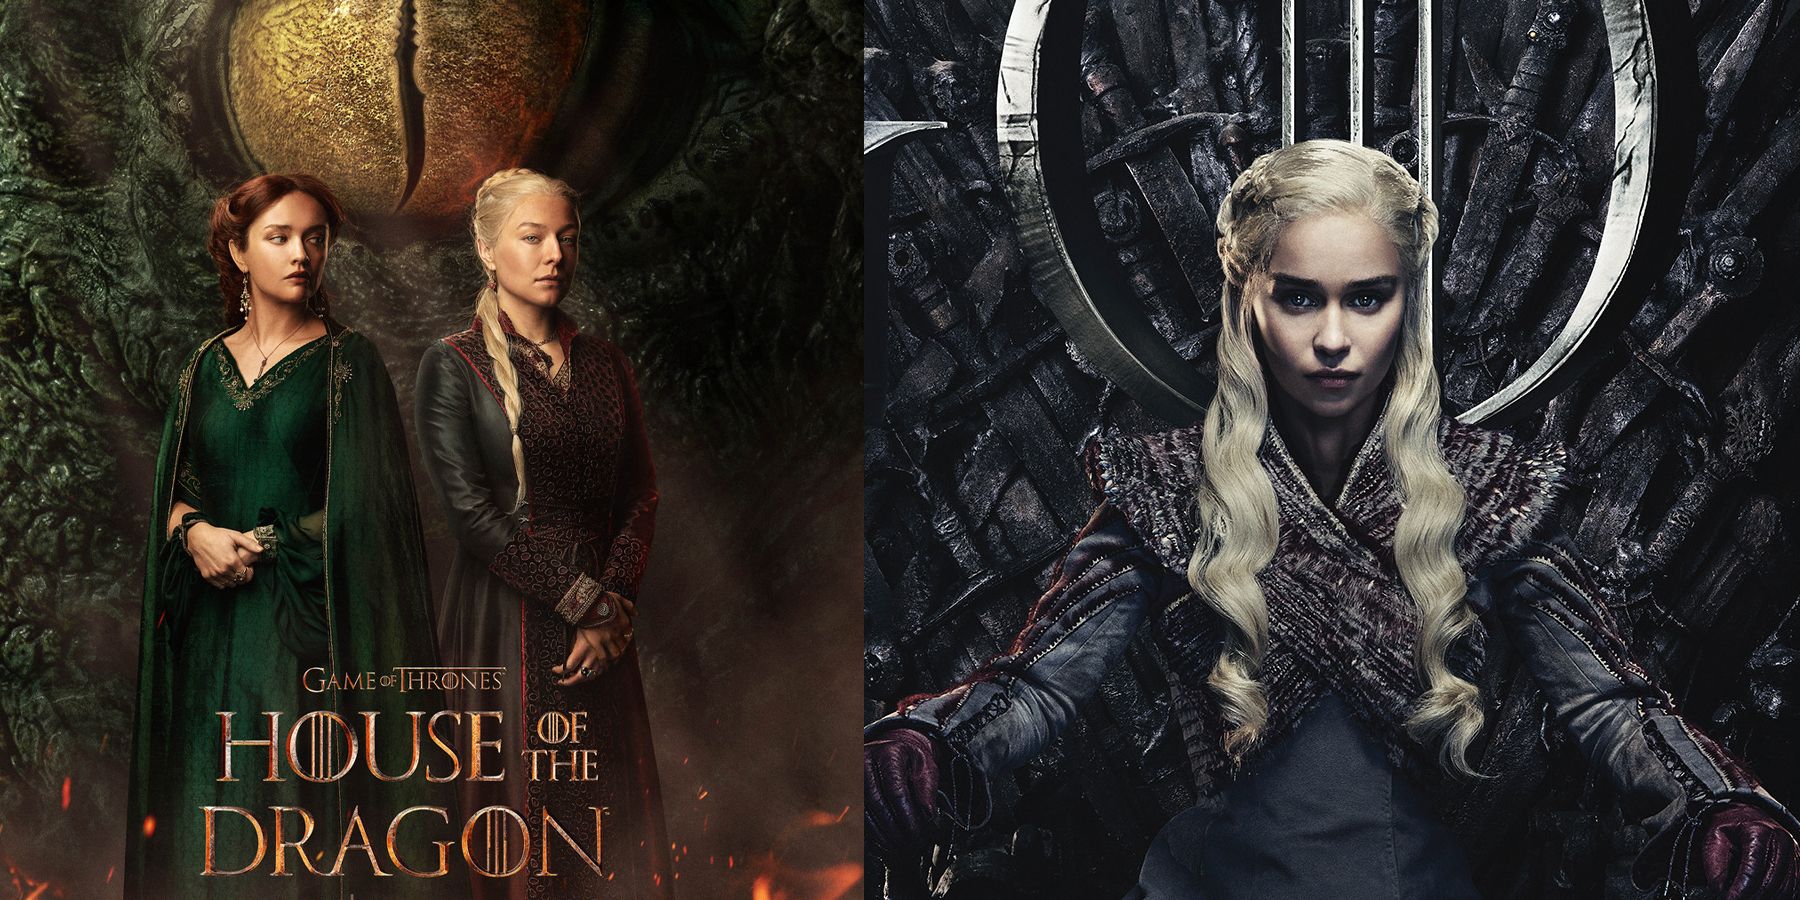 House Of The Dragon' Season 2 filming with surprising character begins,  House Of The Dragon, Season 2, release date, GOT, Game of Thrones prequel,  movies latest news